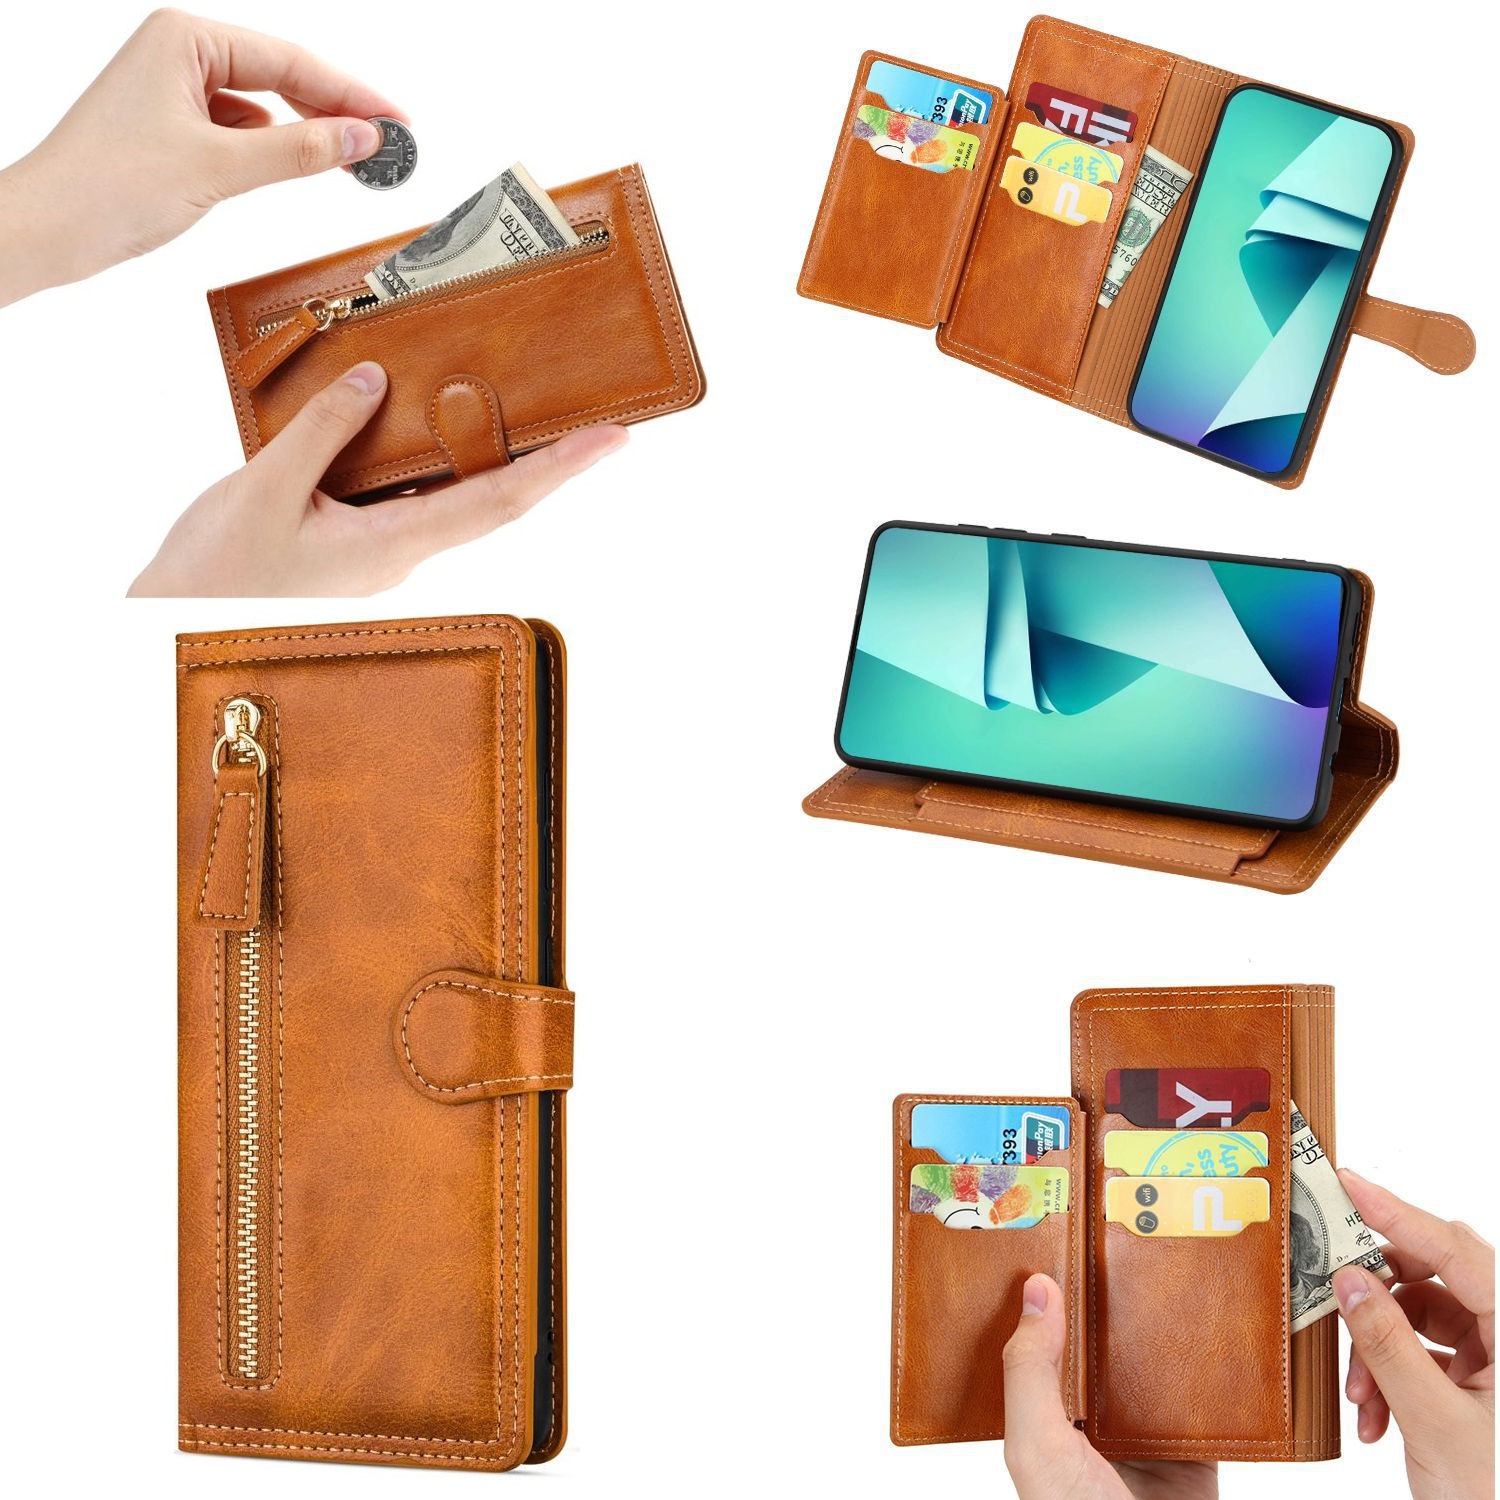 PIERO Leather Zipper Wallet Case Flip Card Holder Stand Phone Cover Premium Leather Flip Cover for Samsung Galaxy S22 PLUS -Orange (FREE SHIPPING)